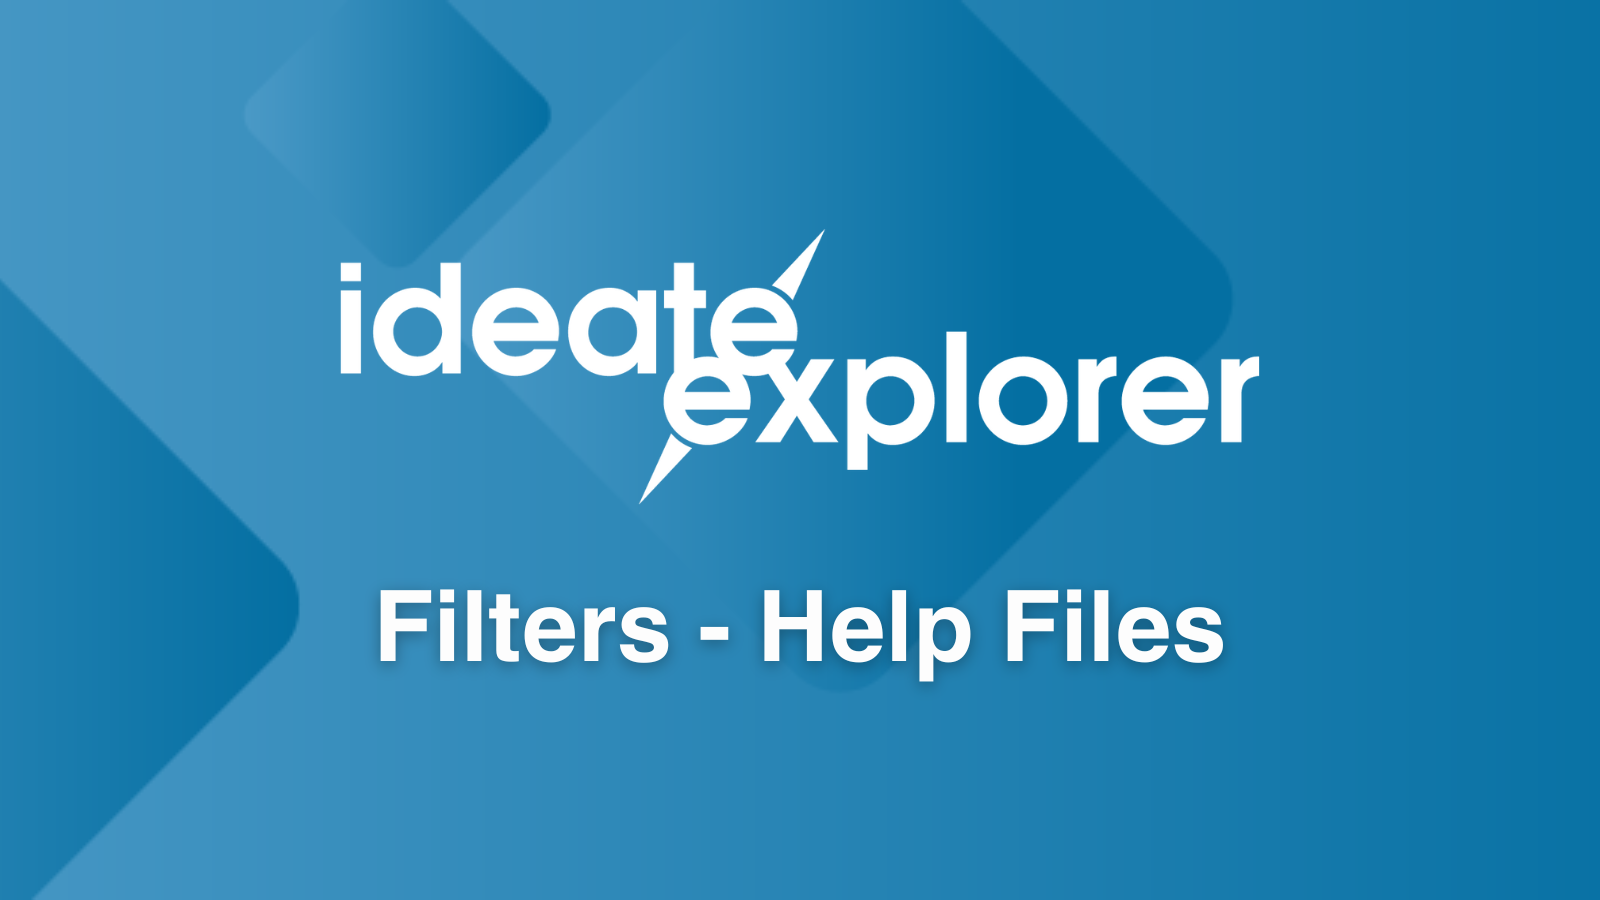 Search Ideate Explorer Filter Help Files